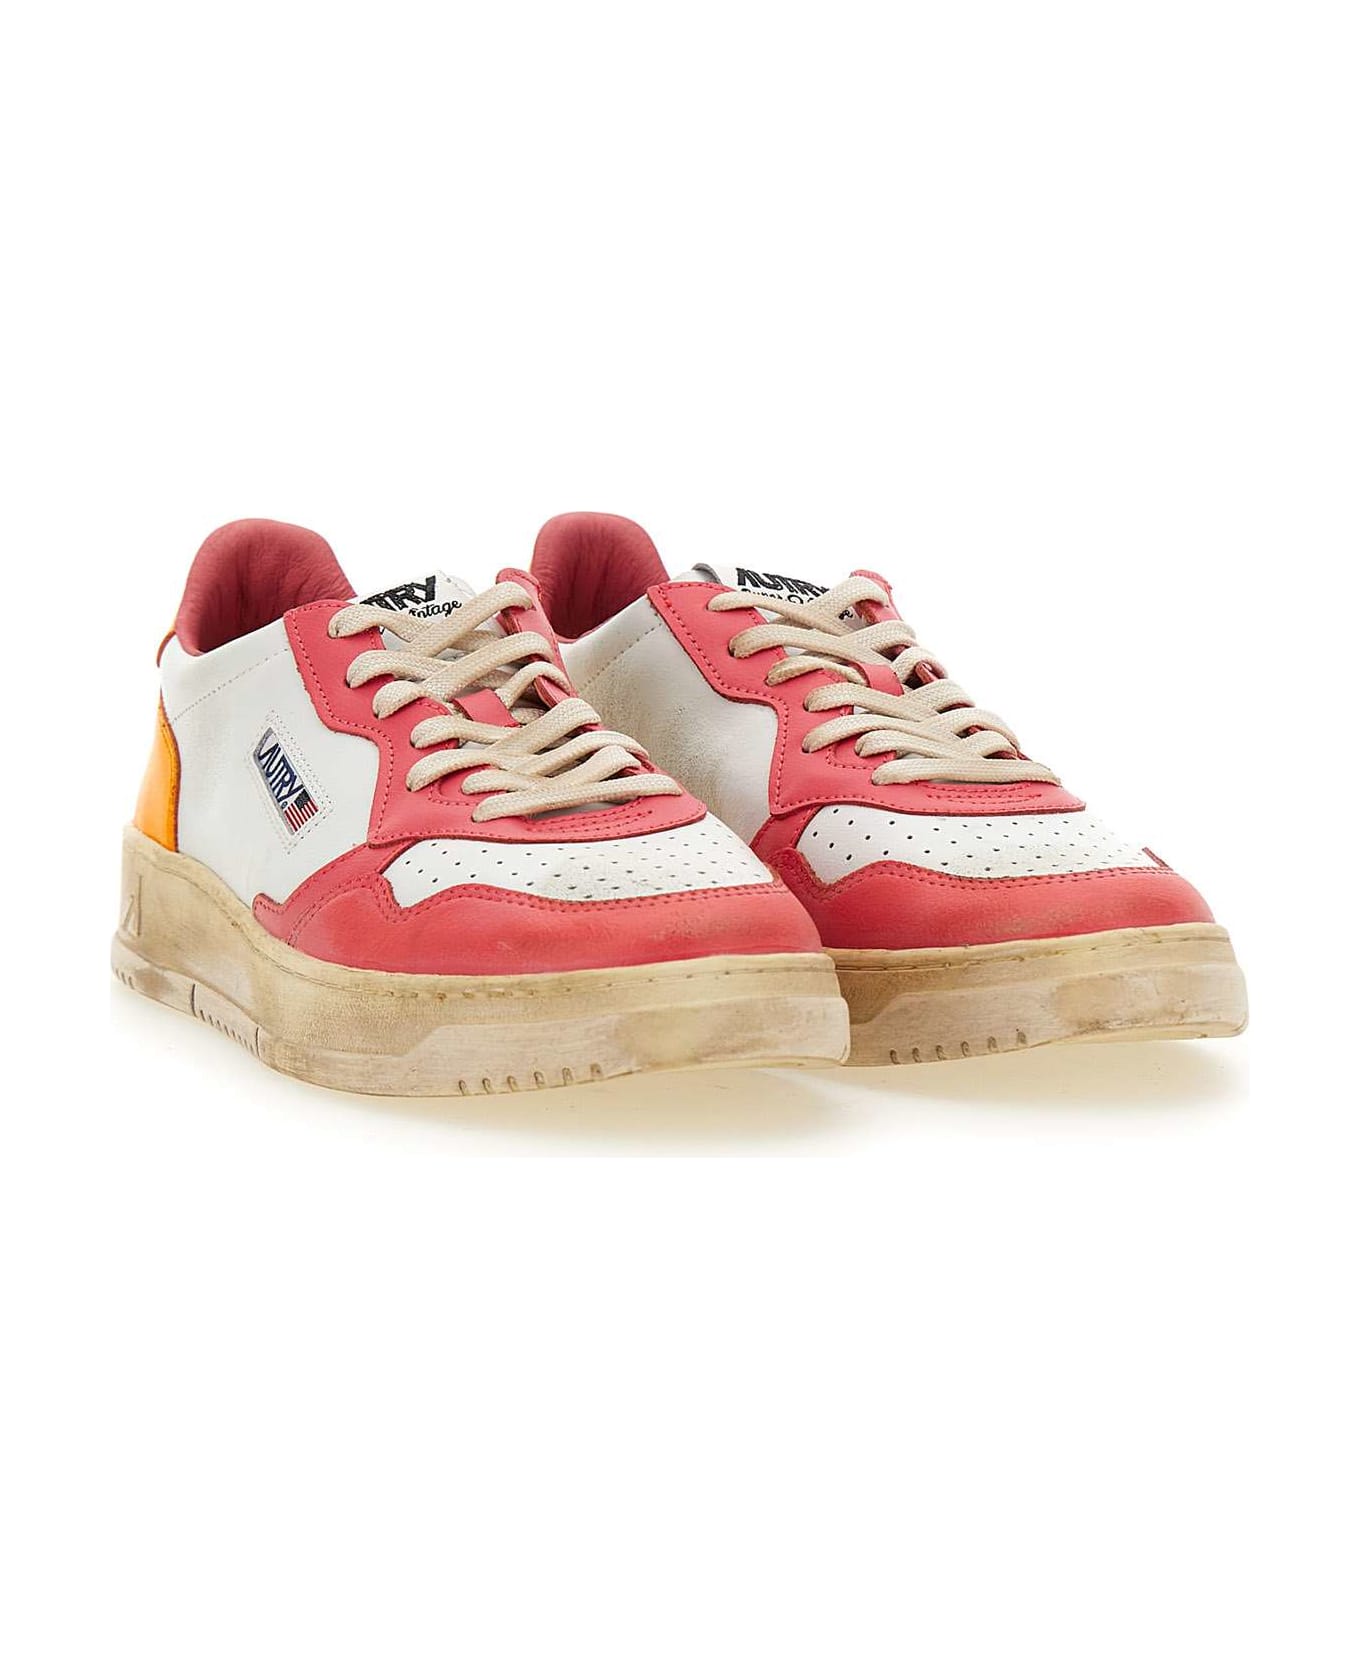 Autry "avlm Sv31" Sneakers Leather - MULTICOLOR